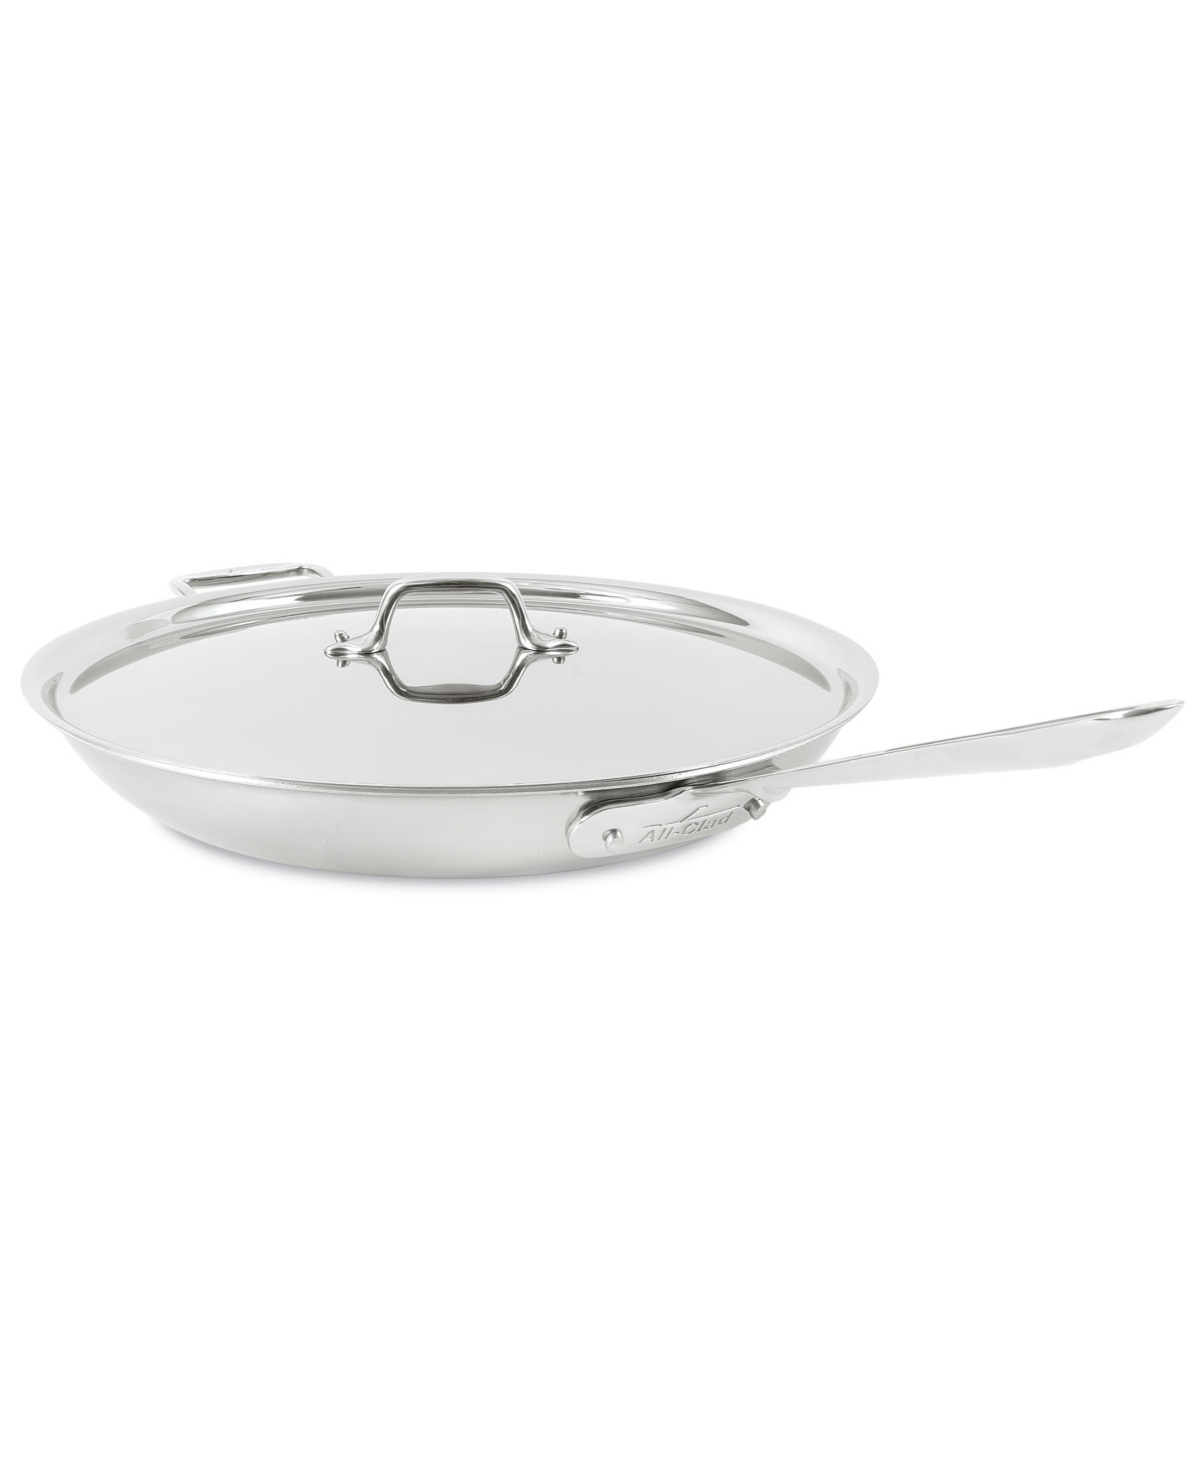 All-clad D3 Stainless 3-ply Bonded Cookware, 14" Fry Pan With Lid In Metallic